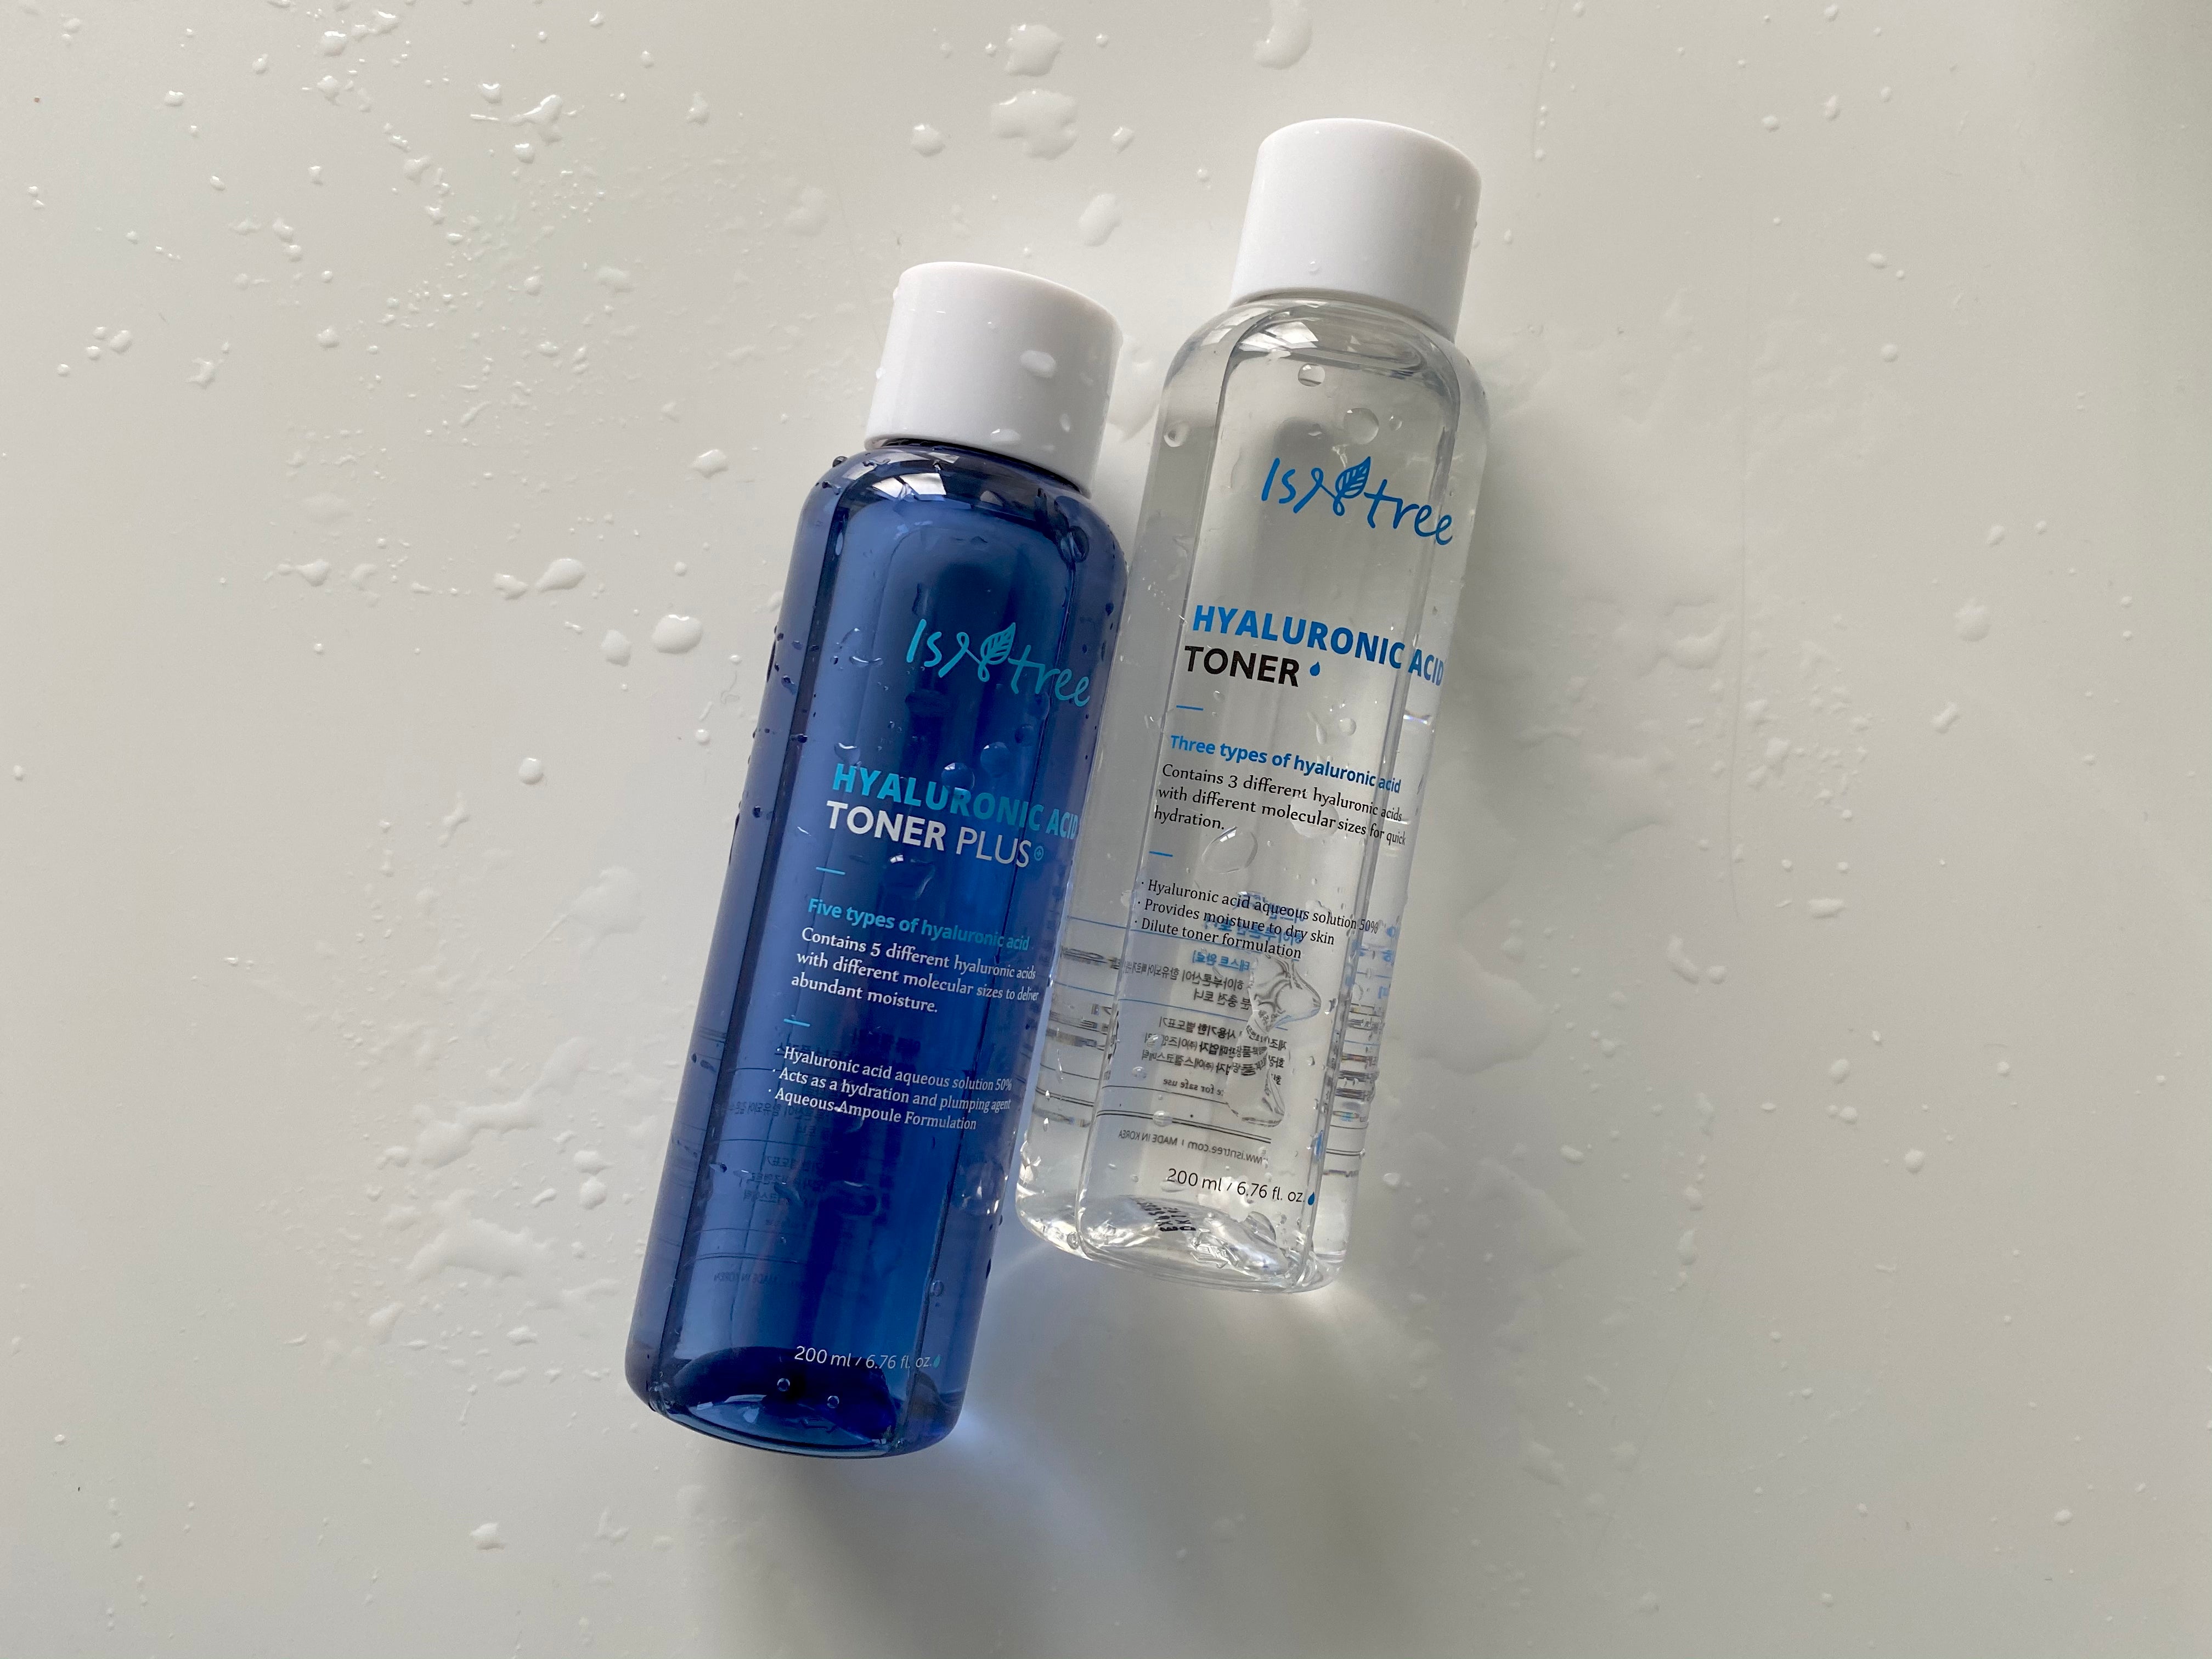 HI-REVIEW: Isntree Hyaluronic Acid Toners 💦